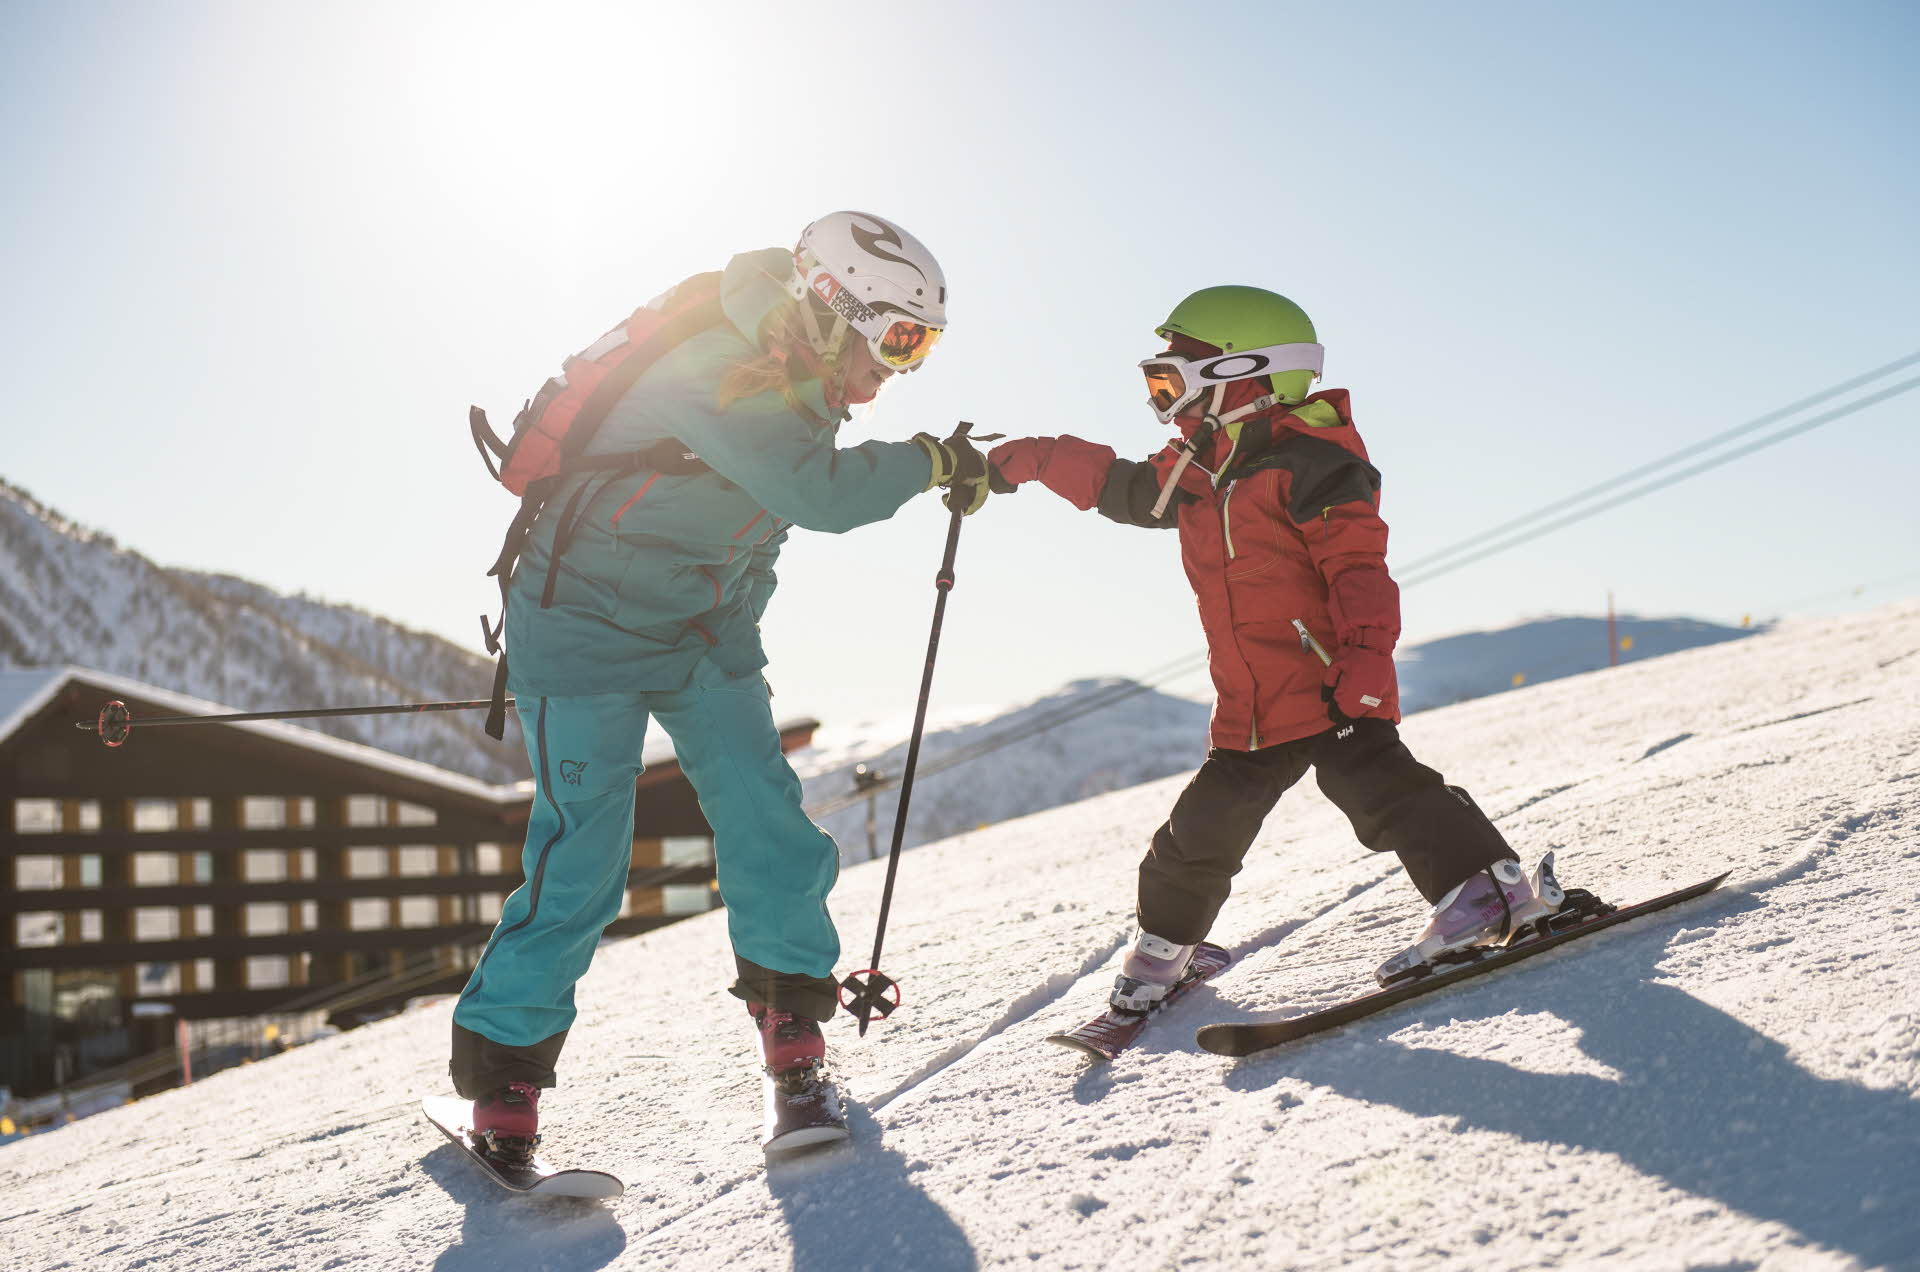 A woman and a child fist bumping on the ski slopes next to Myrkdalen Hotel.